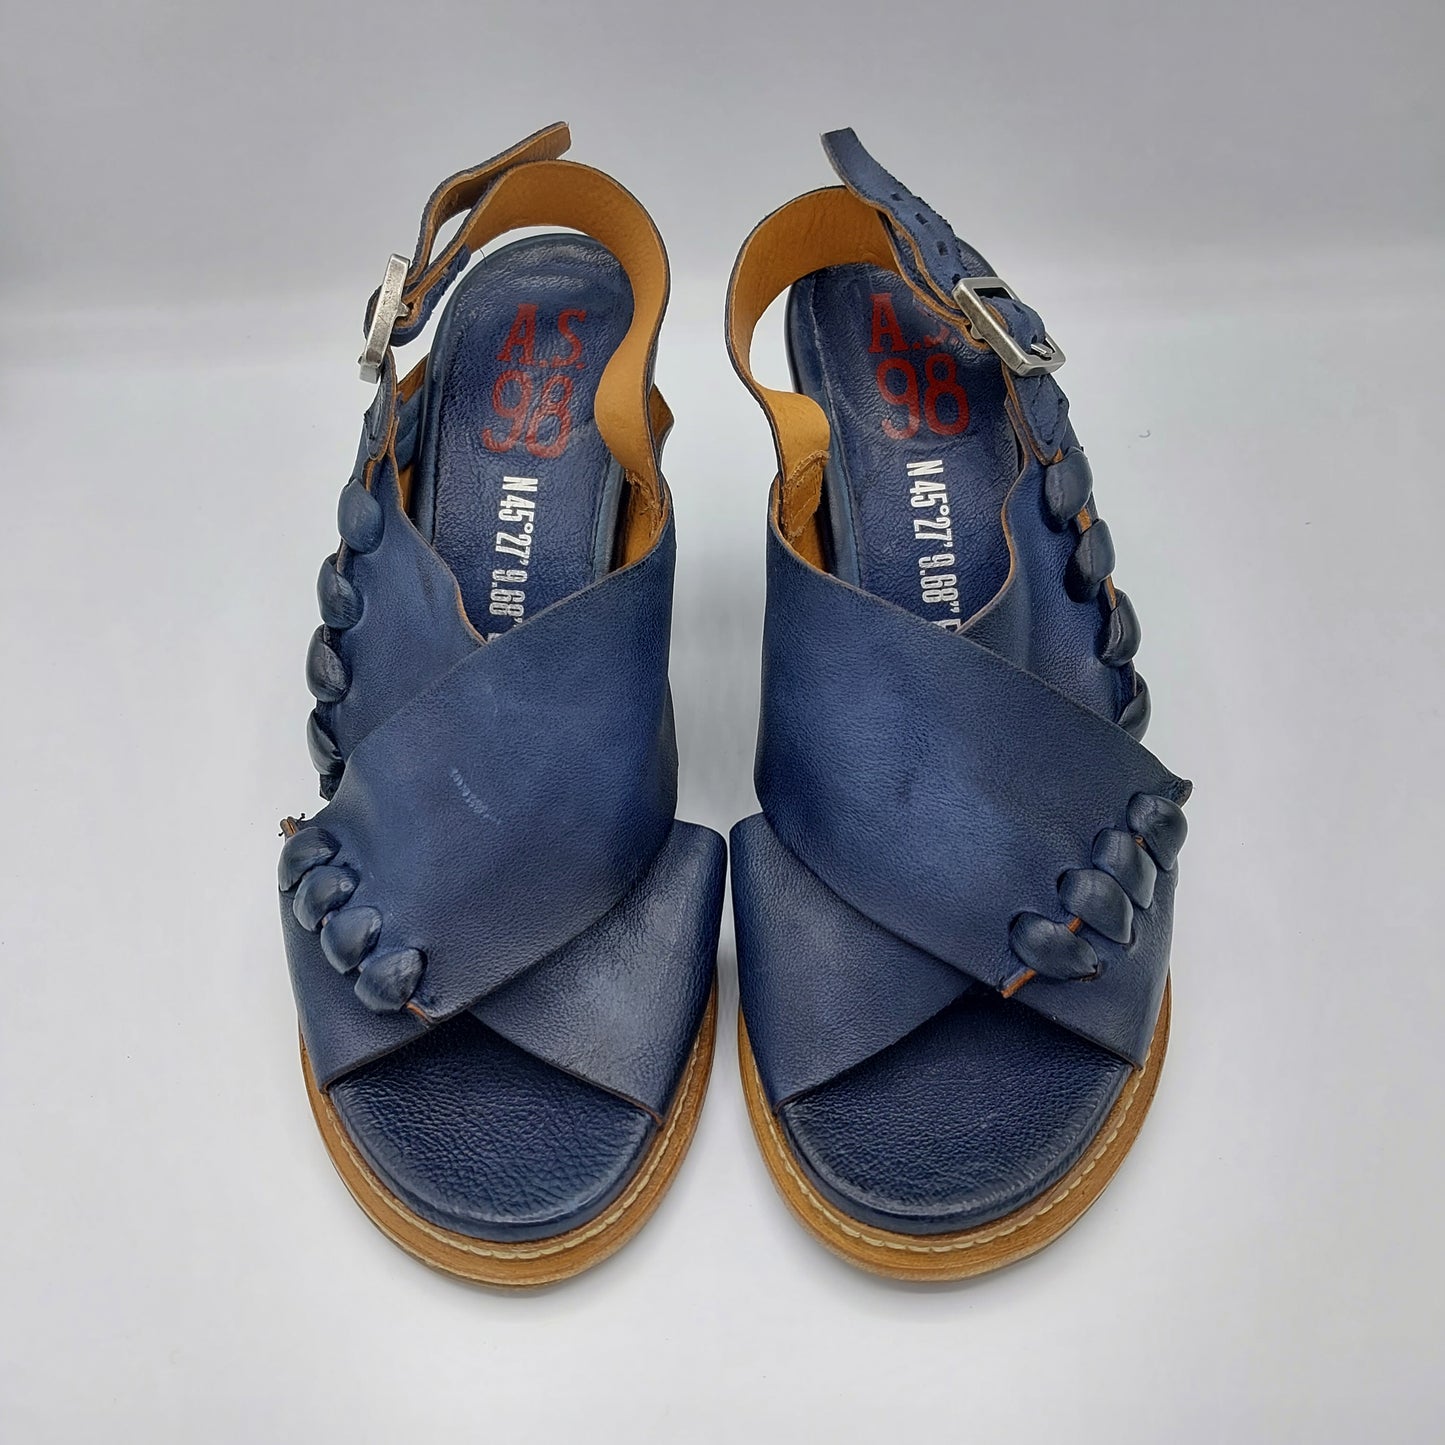 AS 98 blue leather sandal with heel